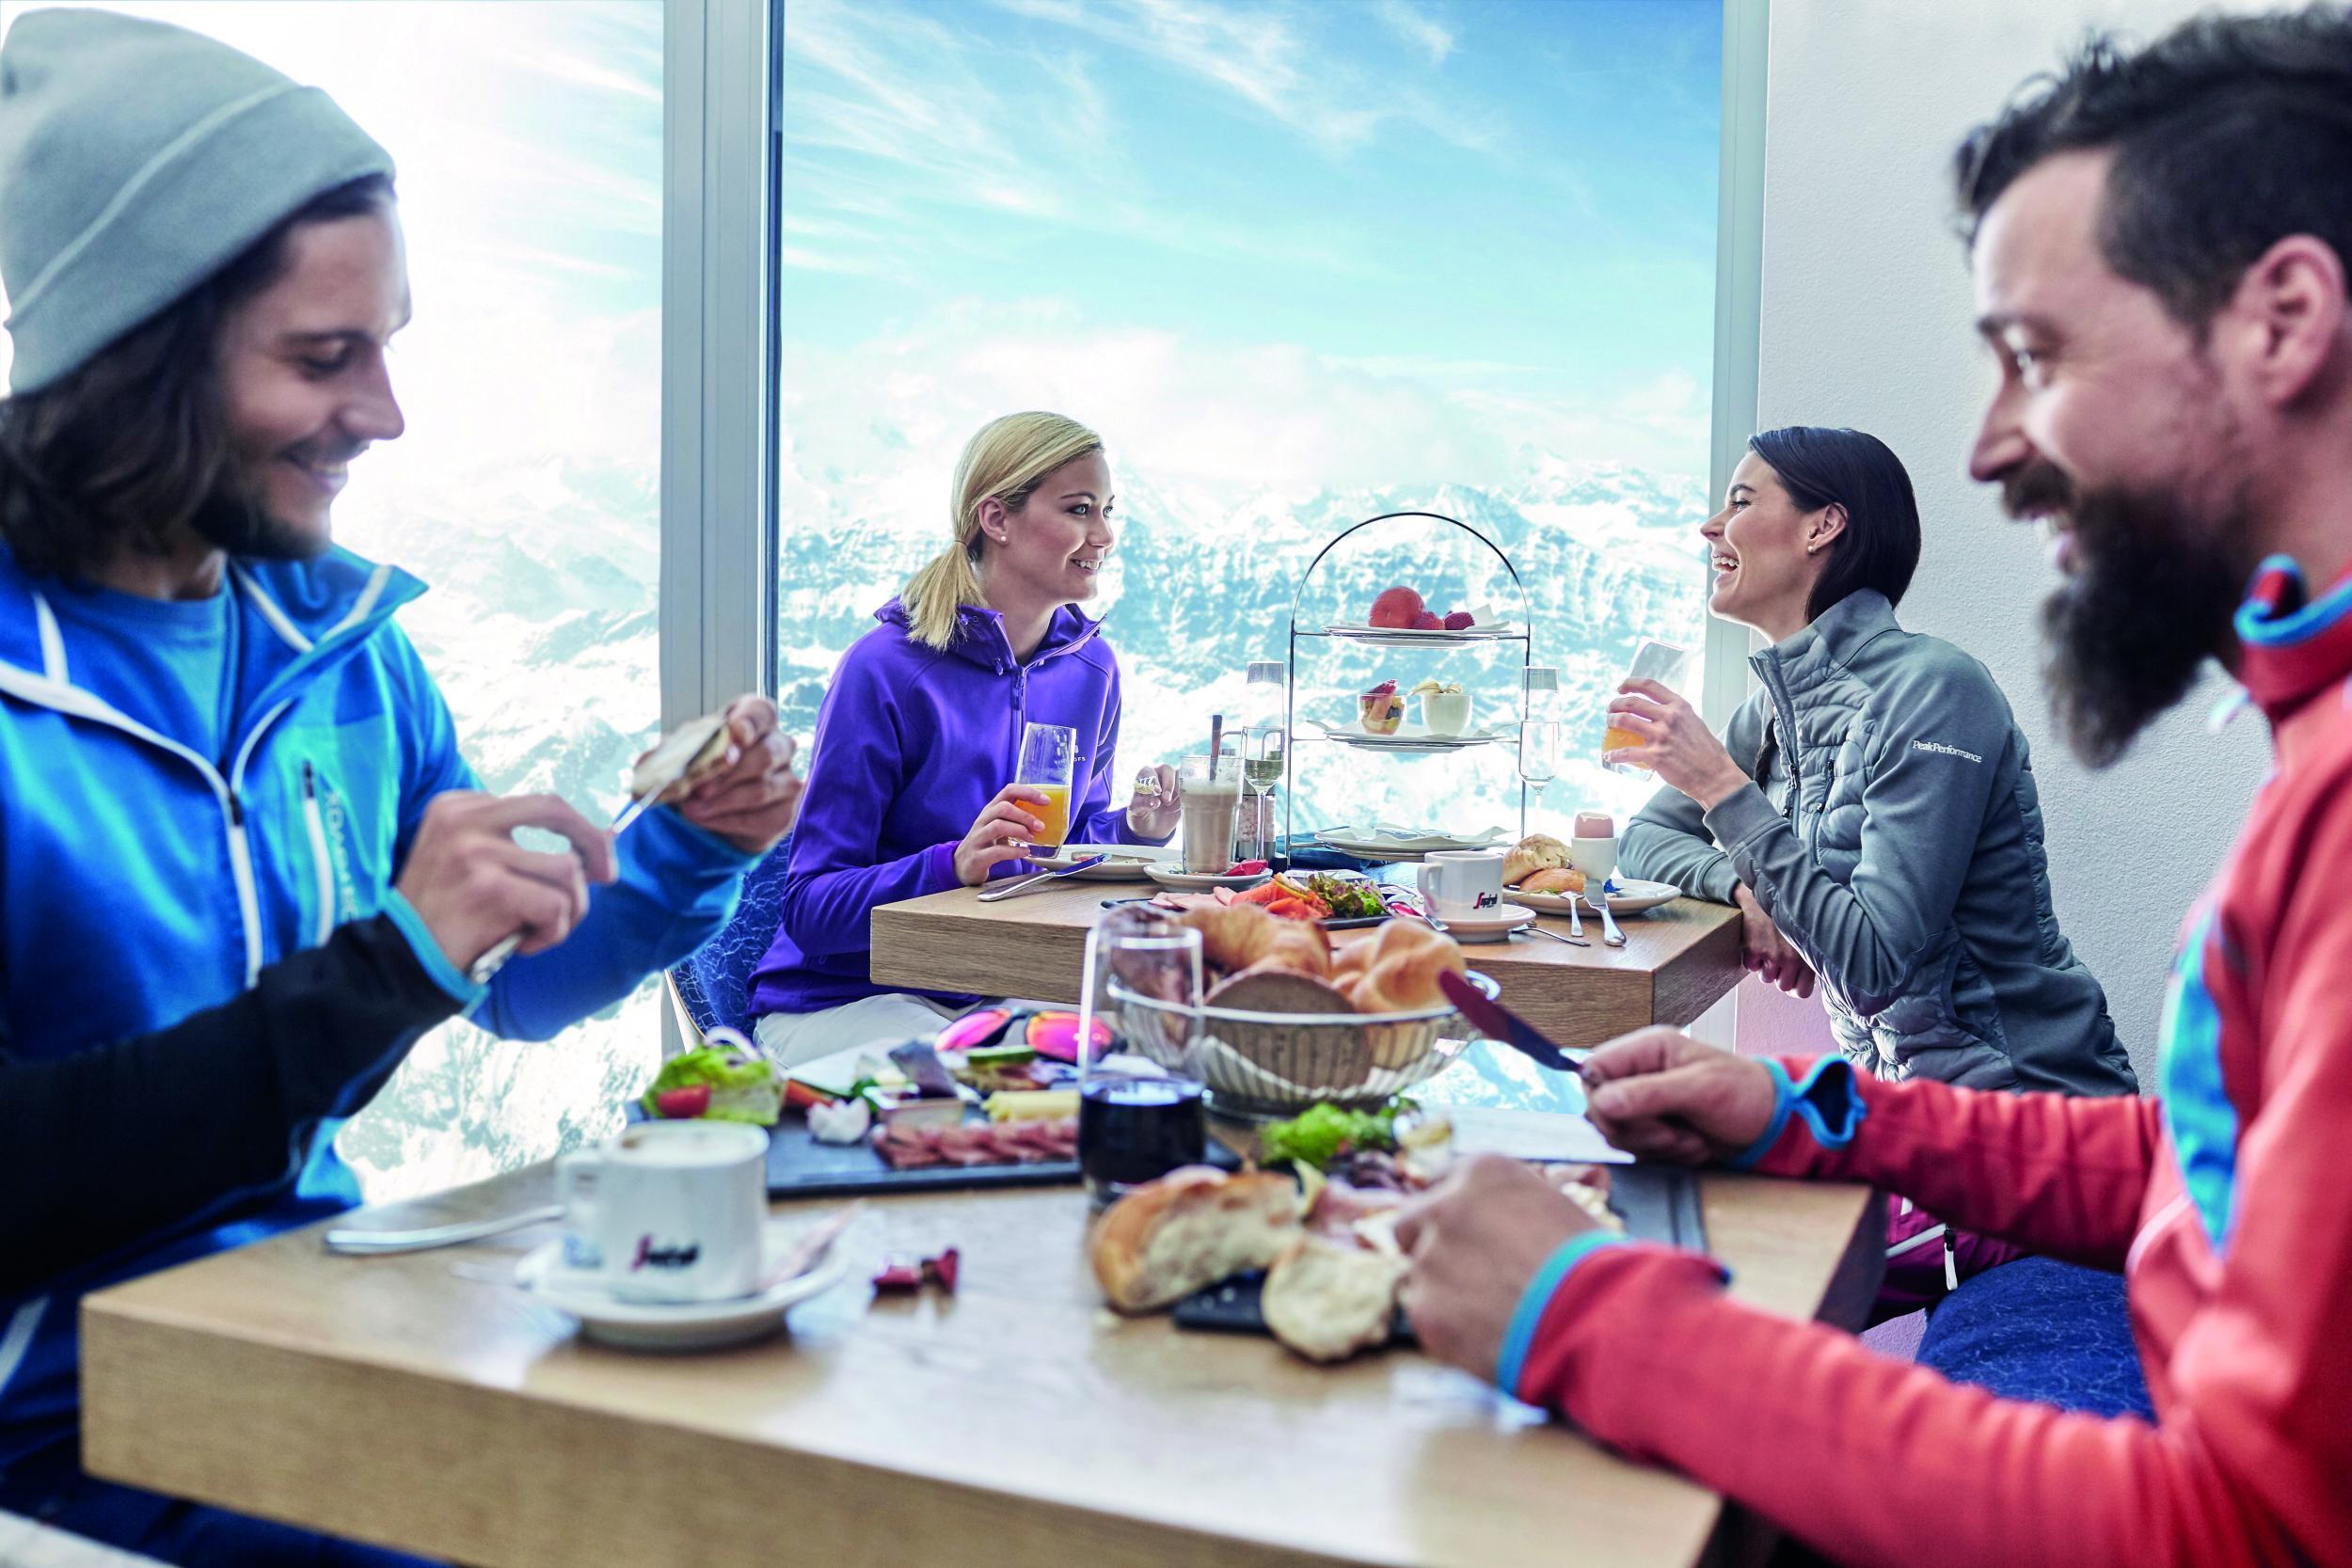 Enjoy food with a view at Gipfel Restaurant, the highest in SalzburgerLand